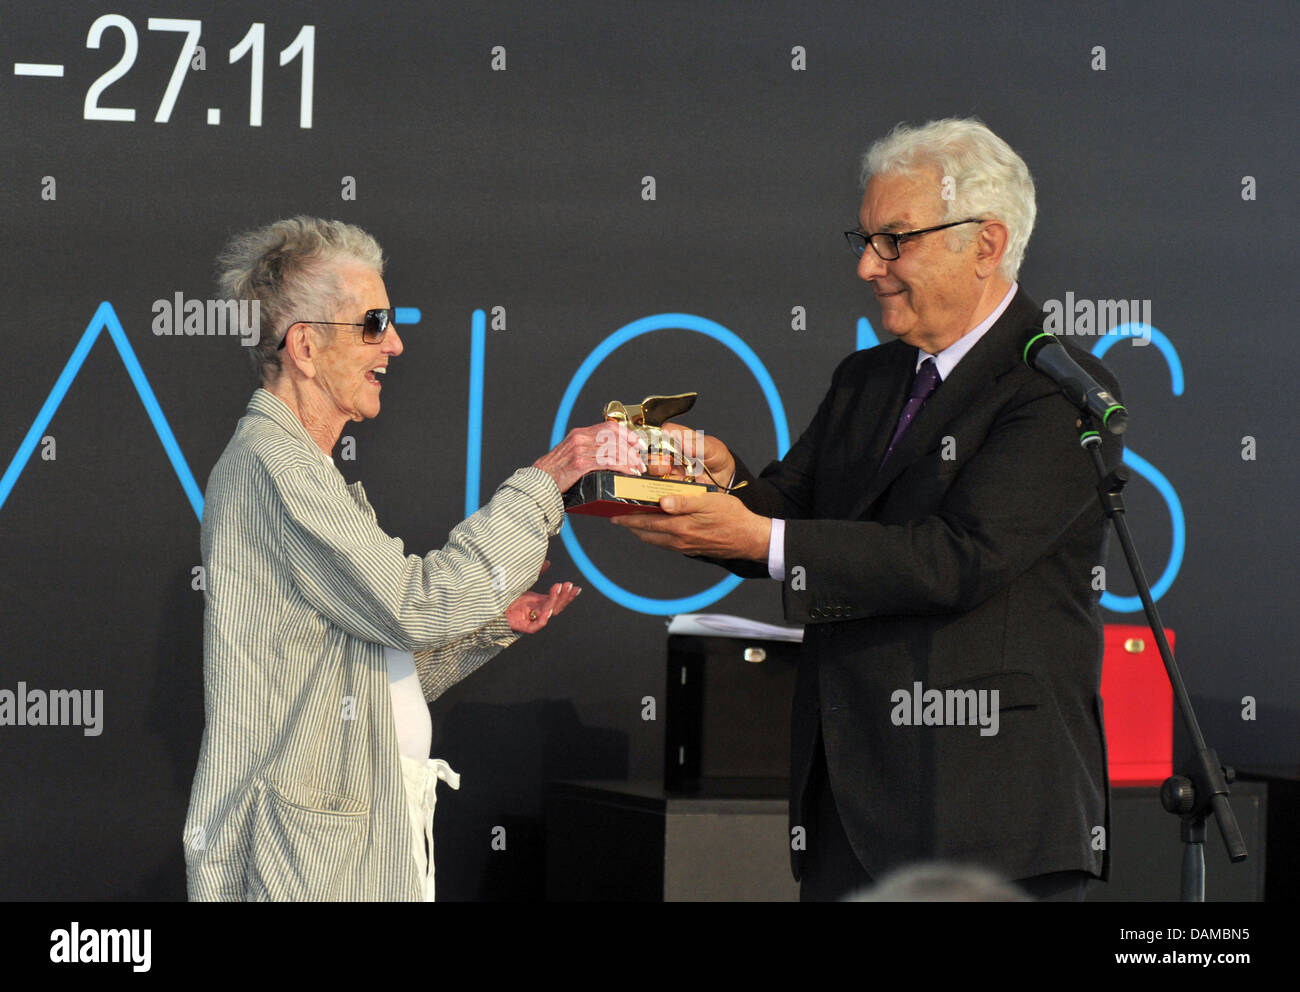 The president of the Venice Biennale, Paolo Baratta (R), hands over a Golden Lion for lifetime achievement to artist Elaine Sturtevant (L) during the opening of the 54th Venice Biennale in Venice, Italy, 04 June 2011. The Biennale takes place every two years in Venice, Italy. Photo: Felix Hoerhager Stock Photo